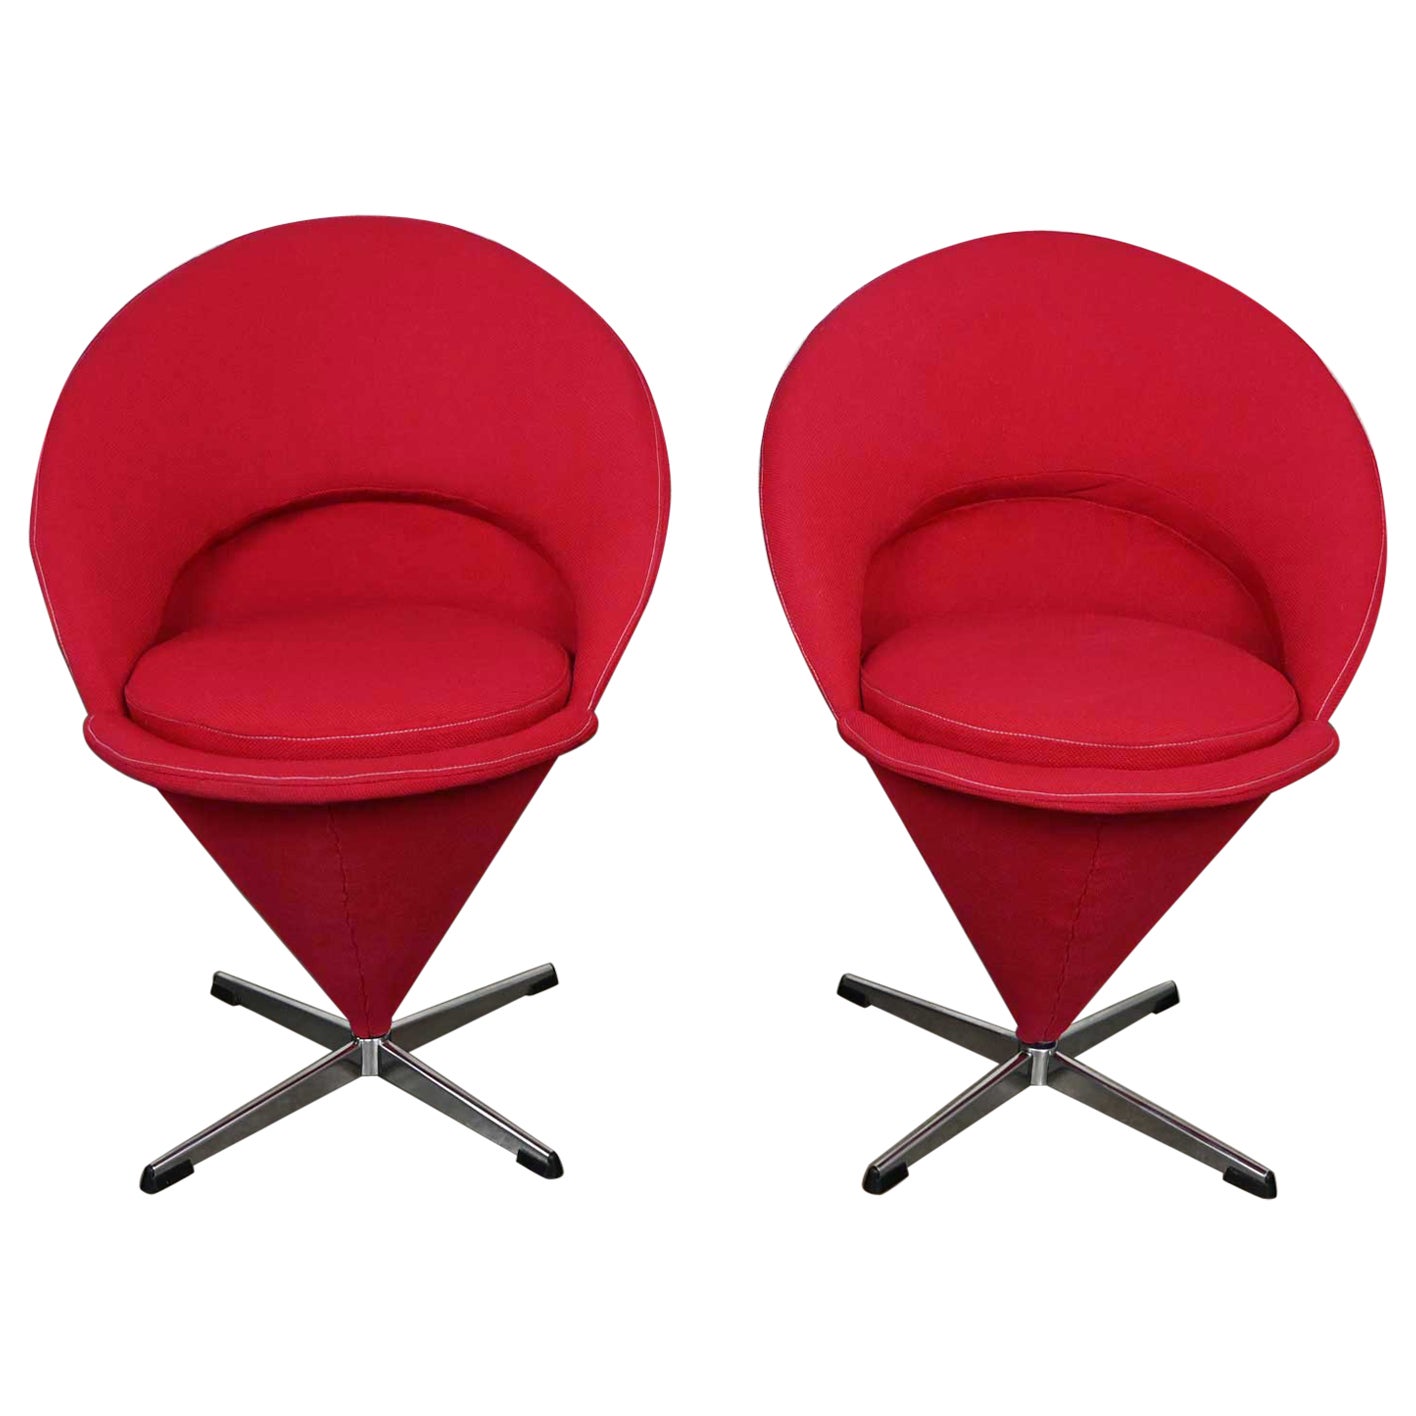 Pair Vintage Mid-Century Modern Red Cone Chairs Verner Panton for Fritz Hansen For Sale